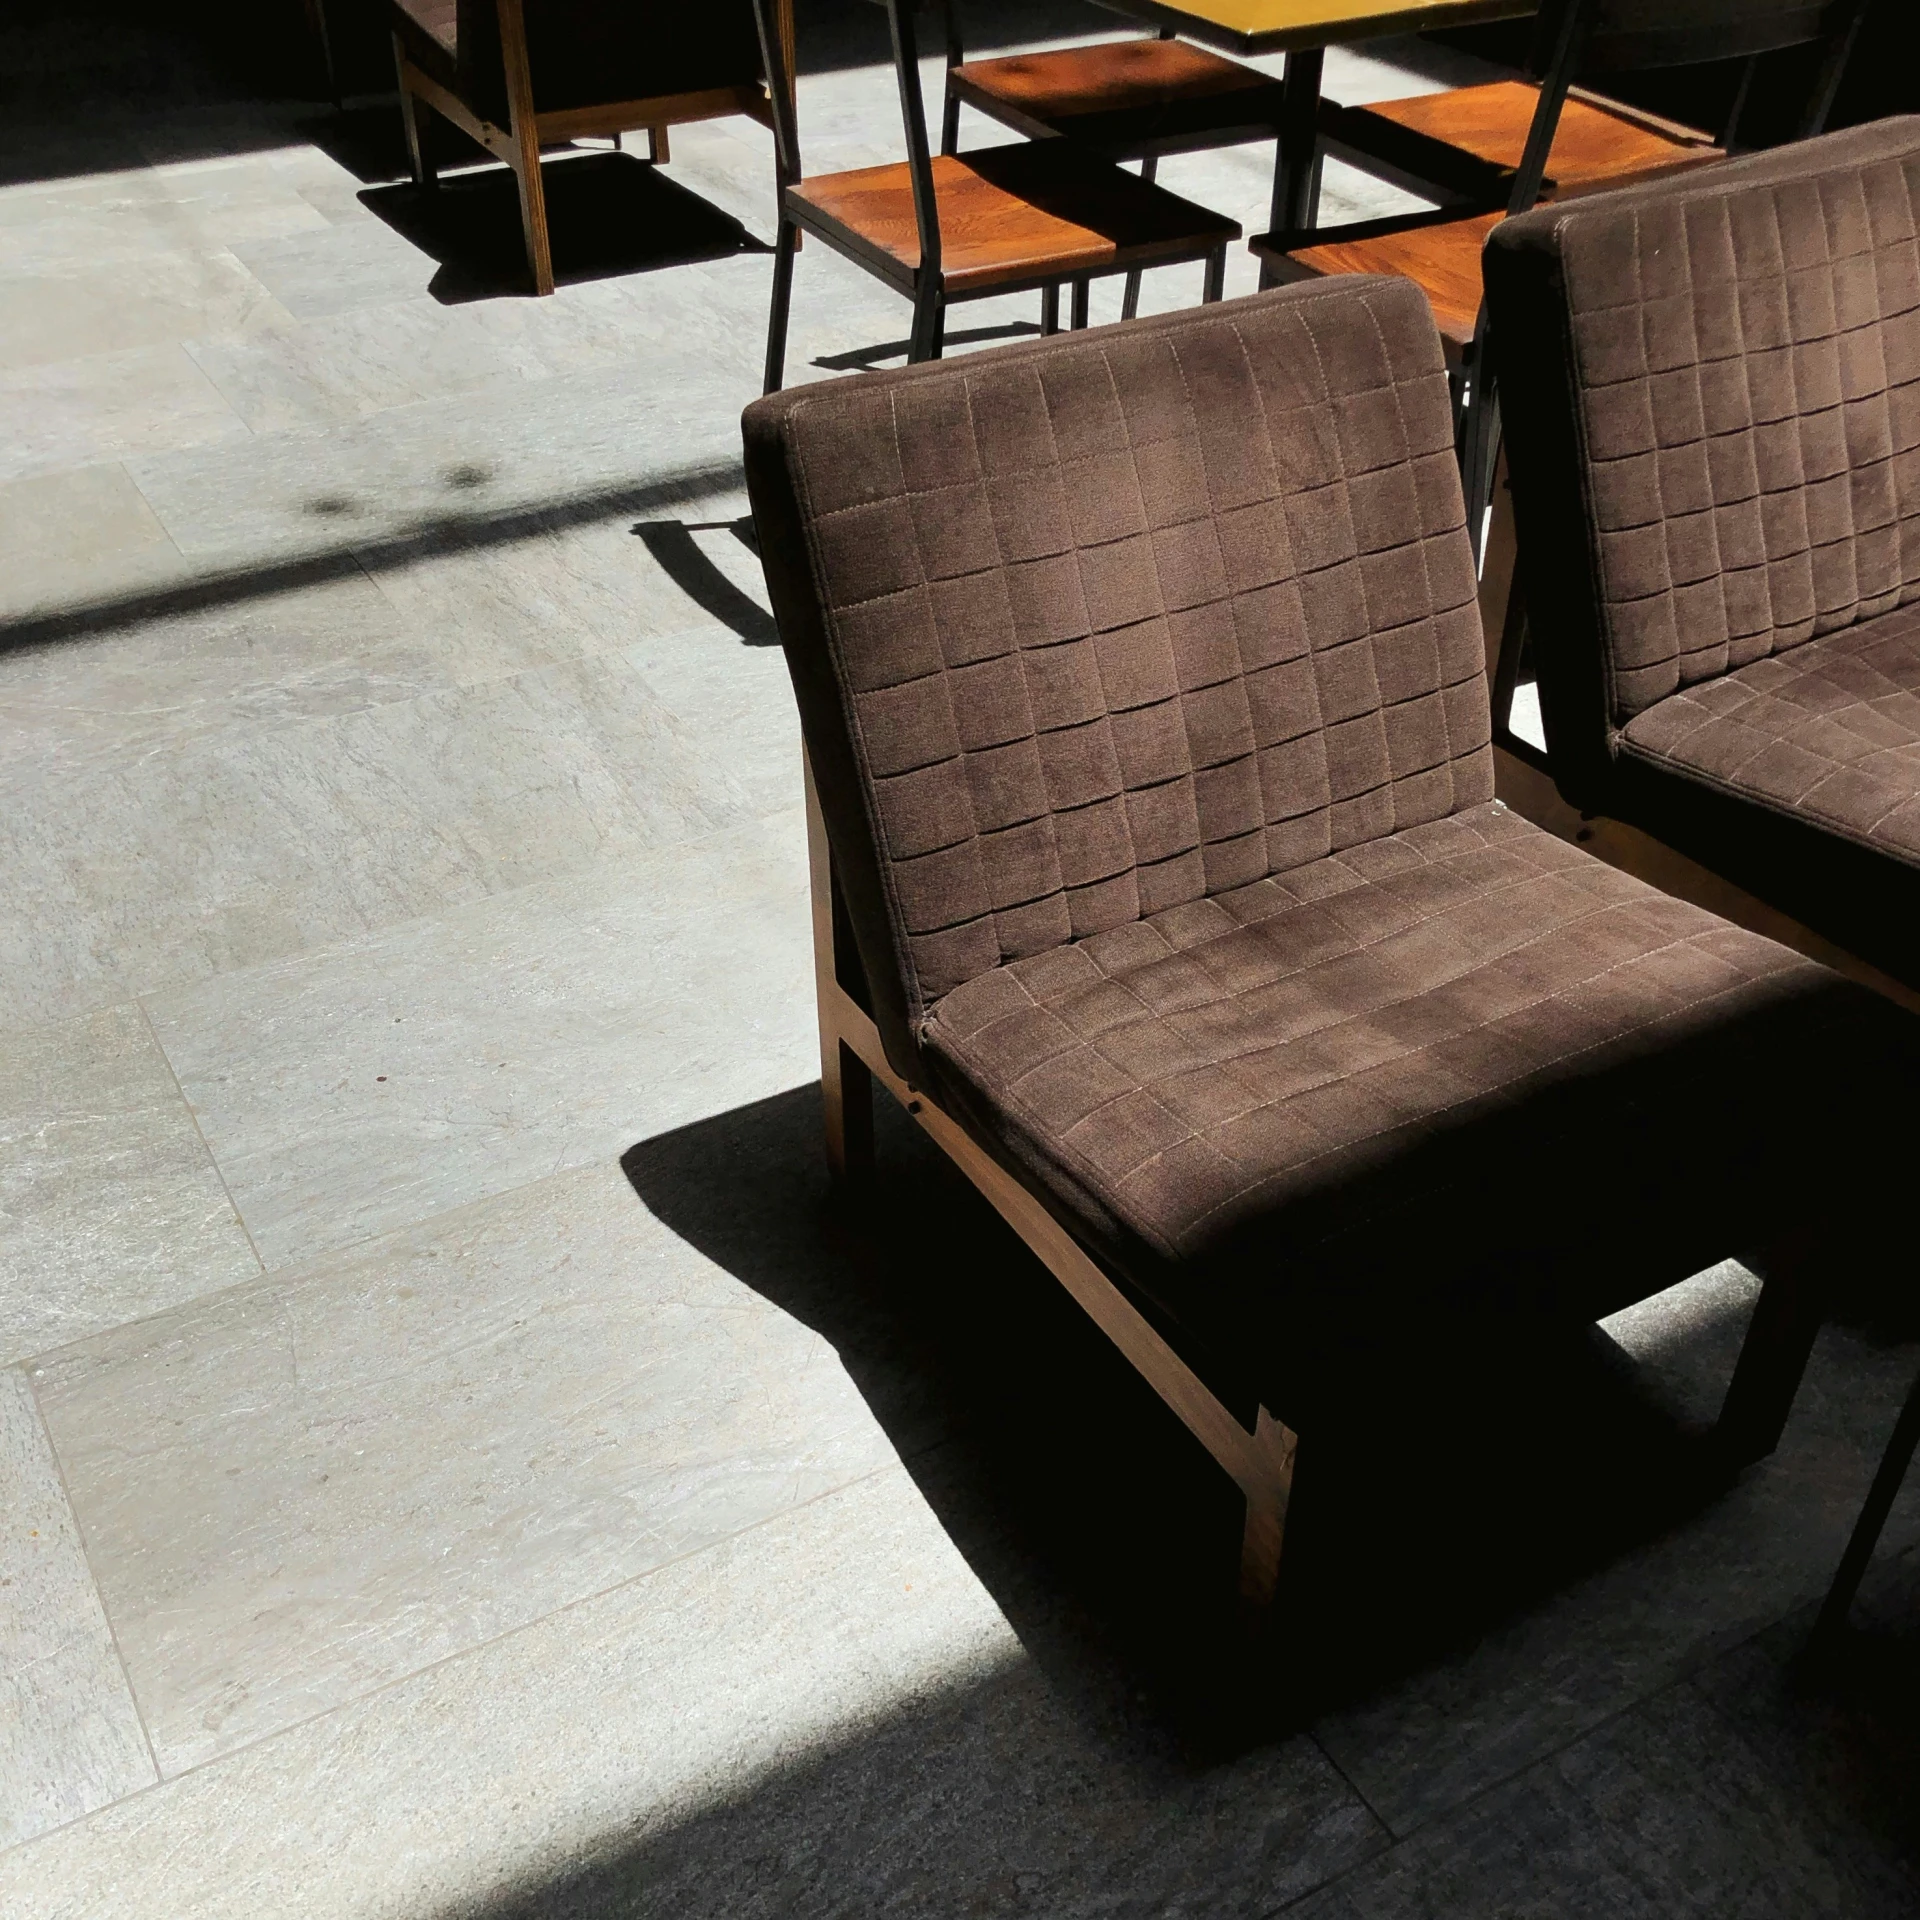 two chairs and table in sunlight at outdoor seating area